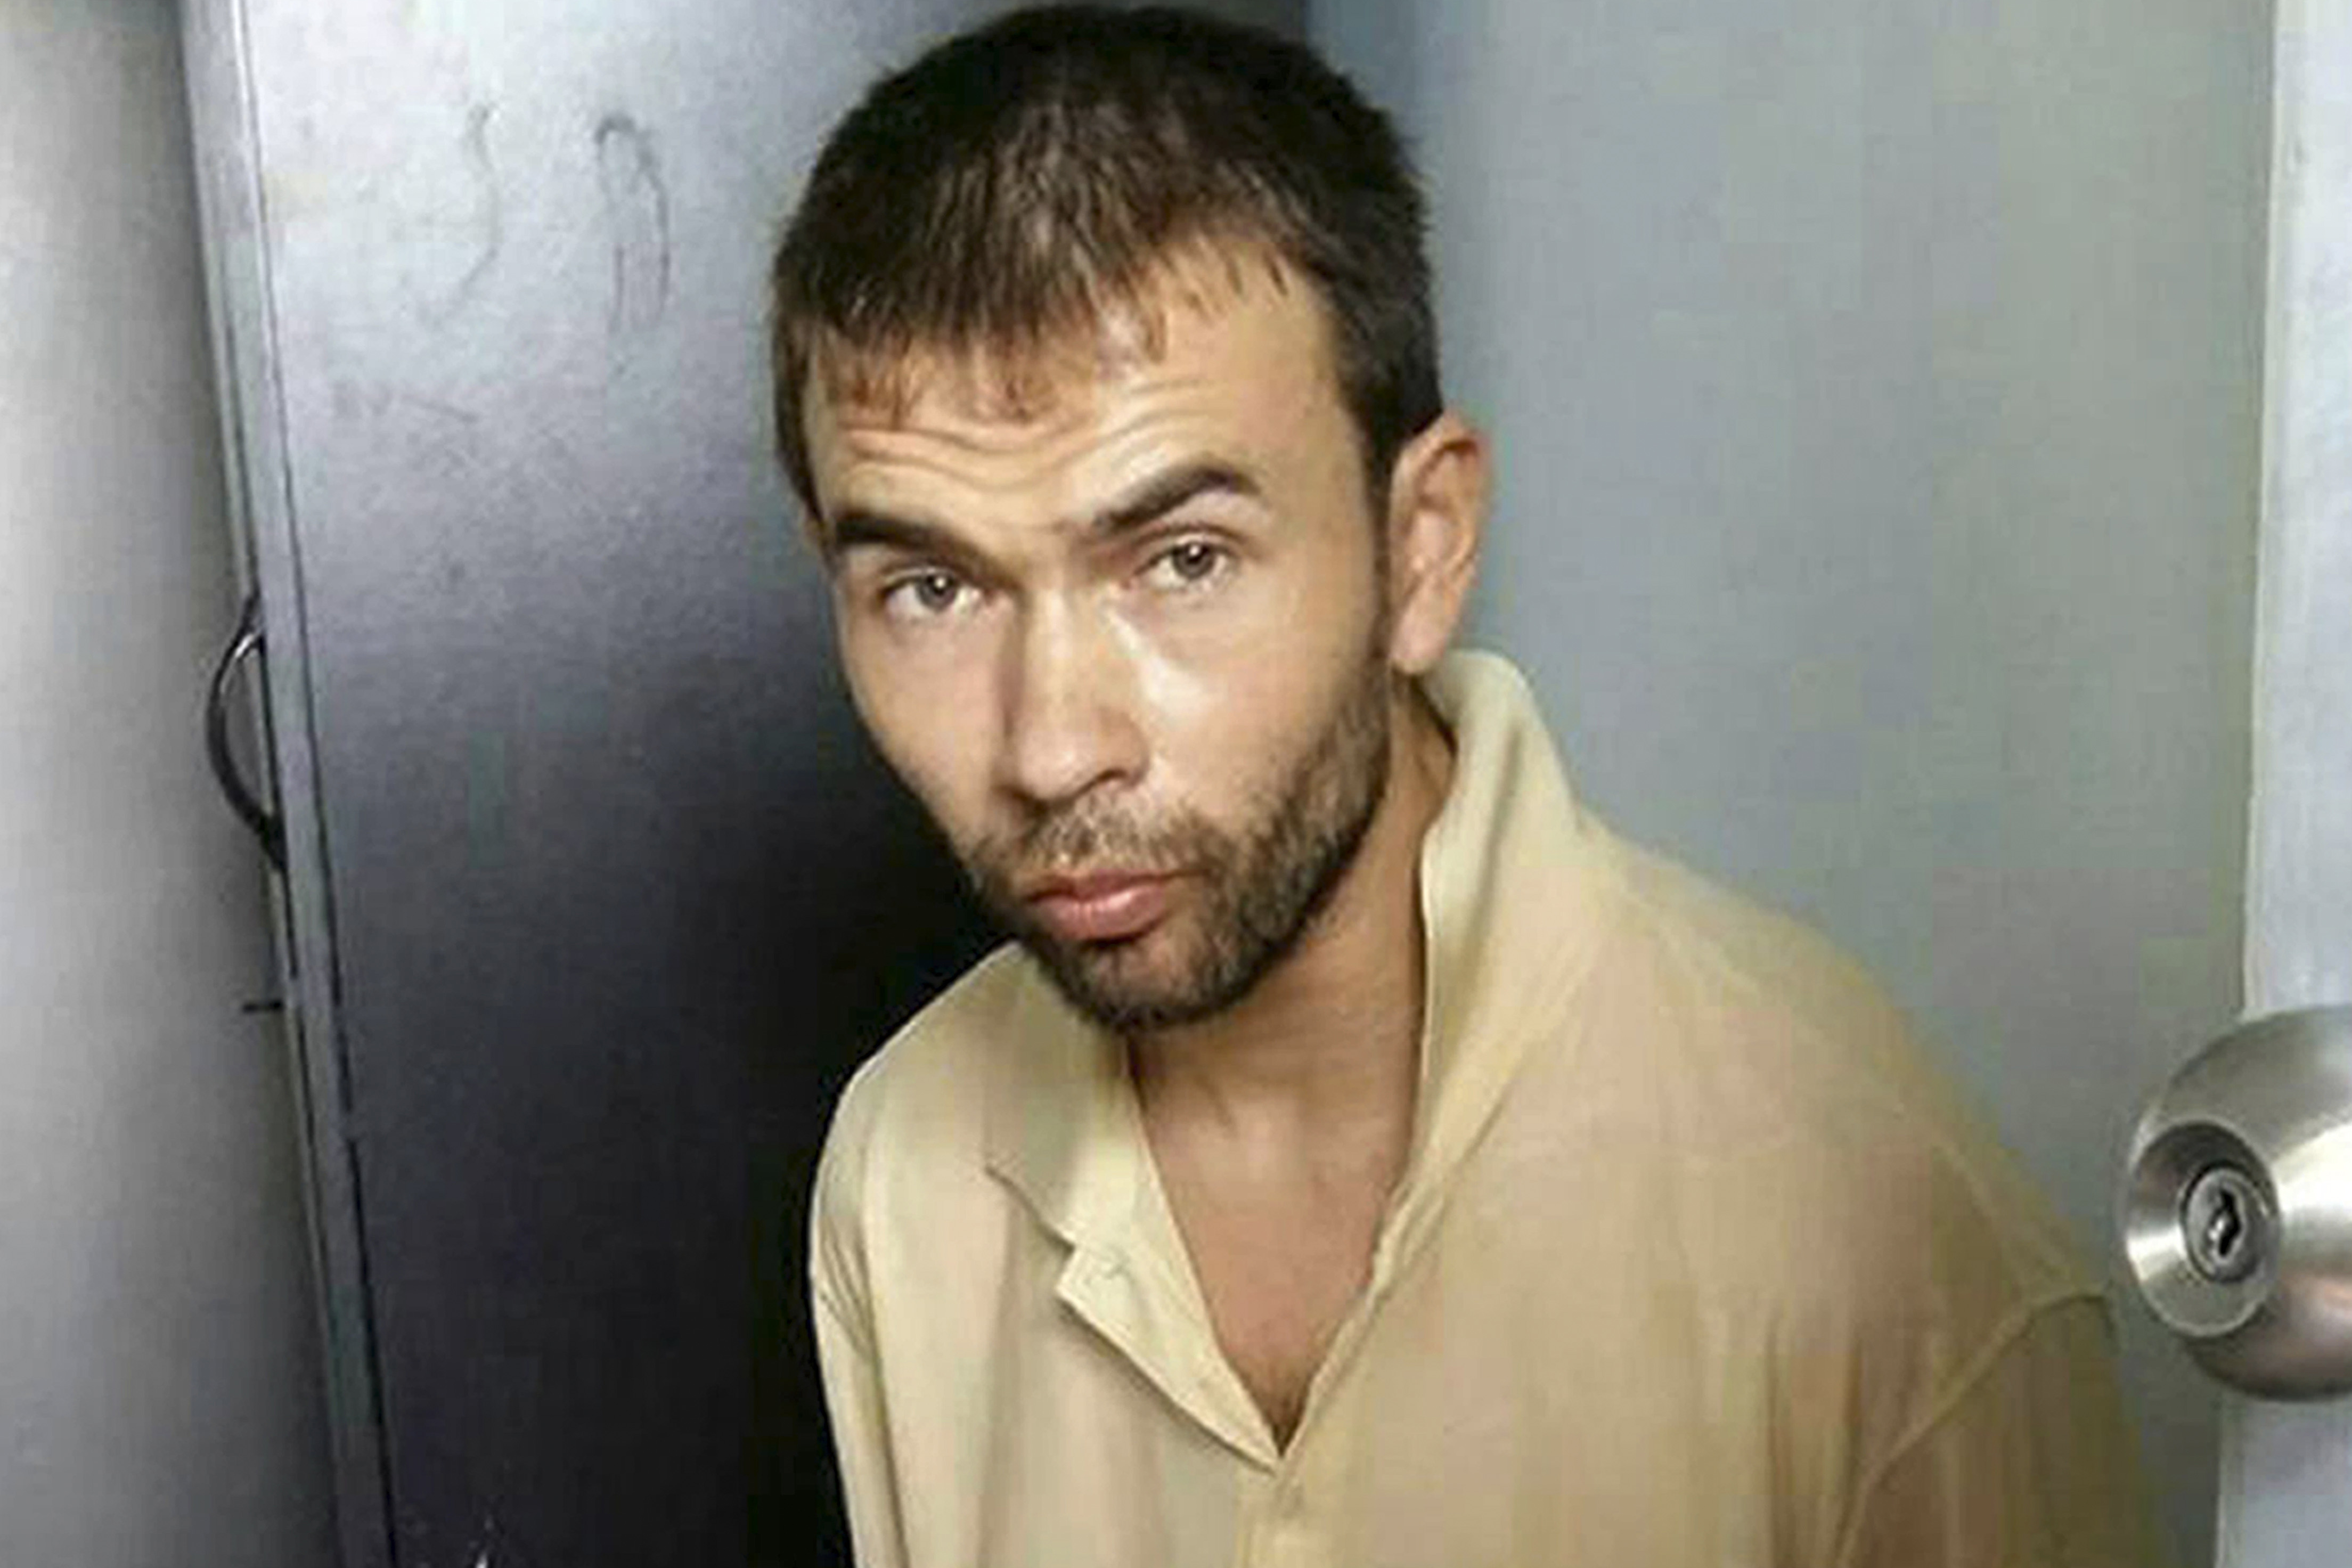 This image released by the Royal Thai Police shows a man who was arrested at an apartment on Saturday, Aug. 29, 2015, in Bangkok, Thailand, along with evidence police said included bomb-making equipment and stacks of passports. Thai investigators said they have linked this man to the Erawan Shrine bombing on Aug. 17. (Royal Thai Police via AP)